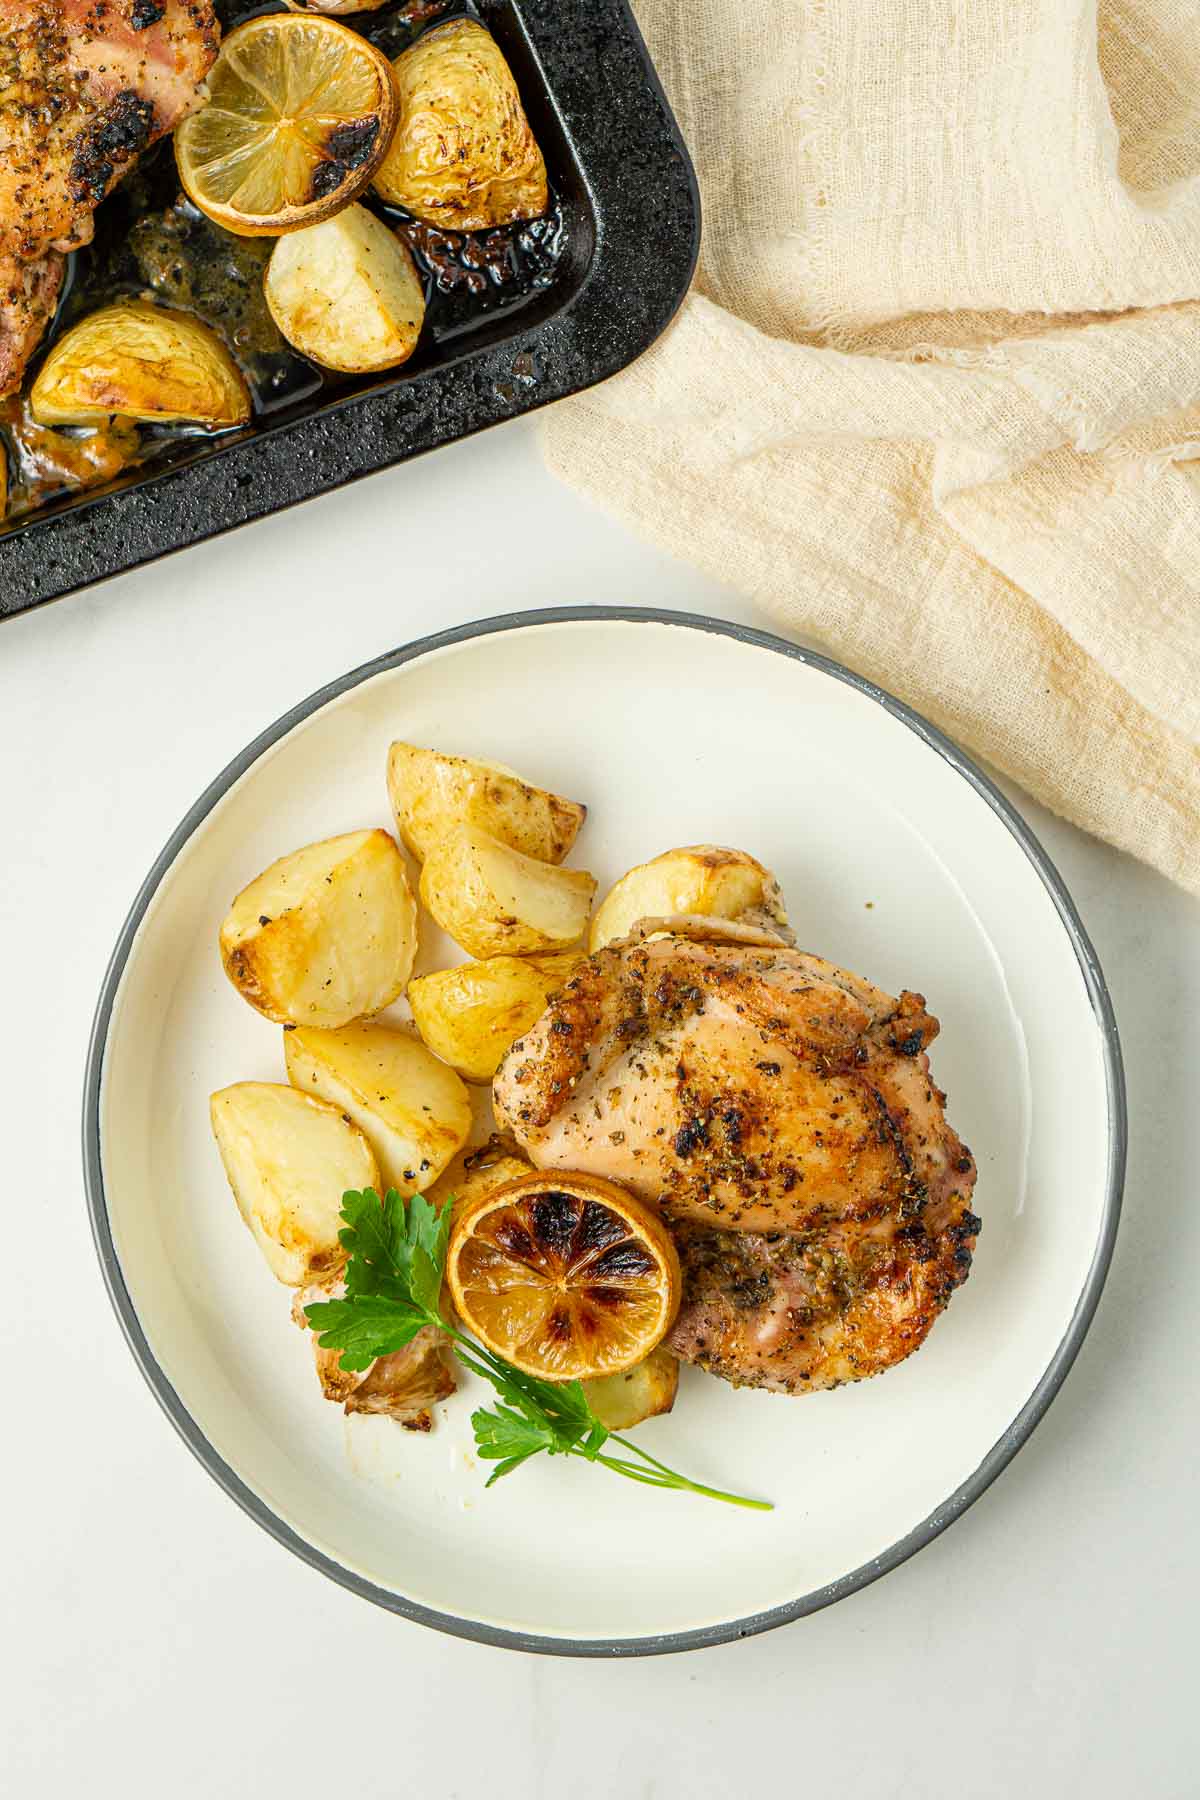 Chicken, potatoes, lemon and parsley on a white plate with a grey rim.